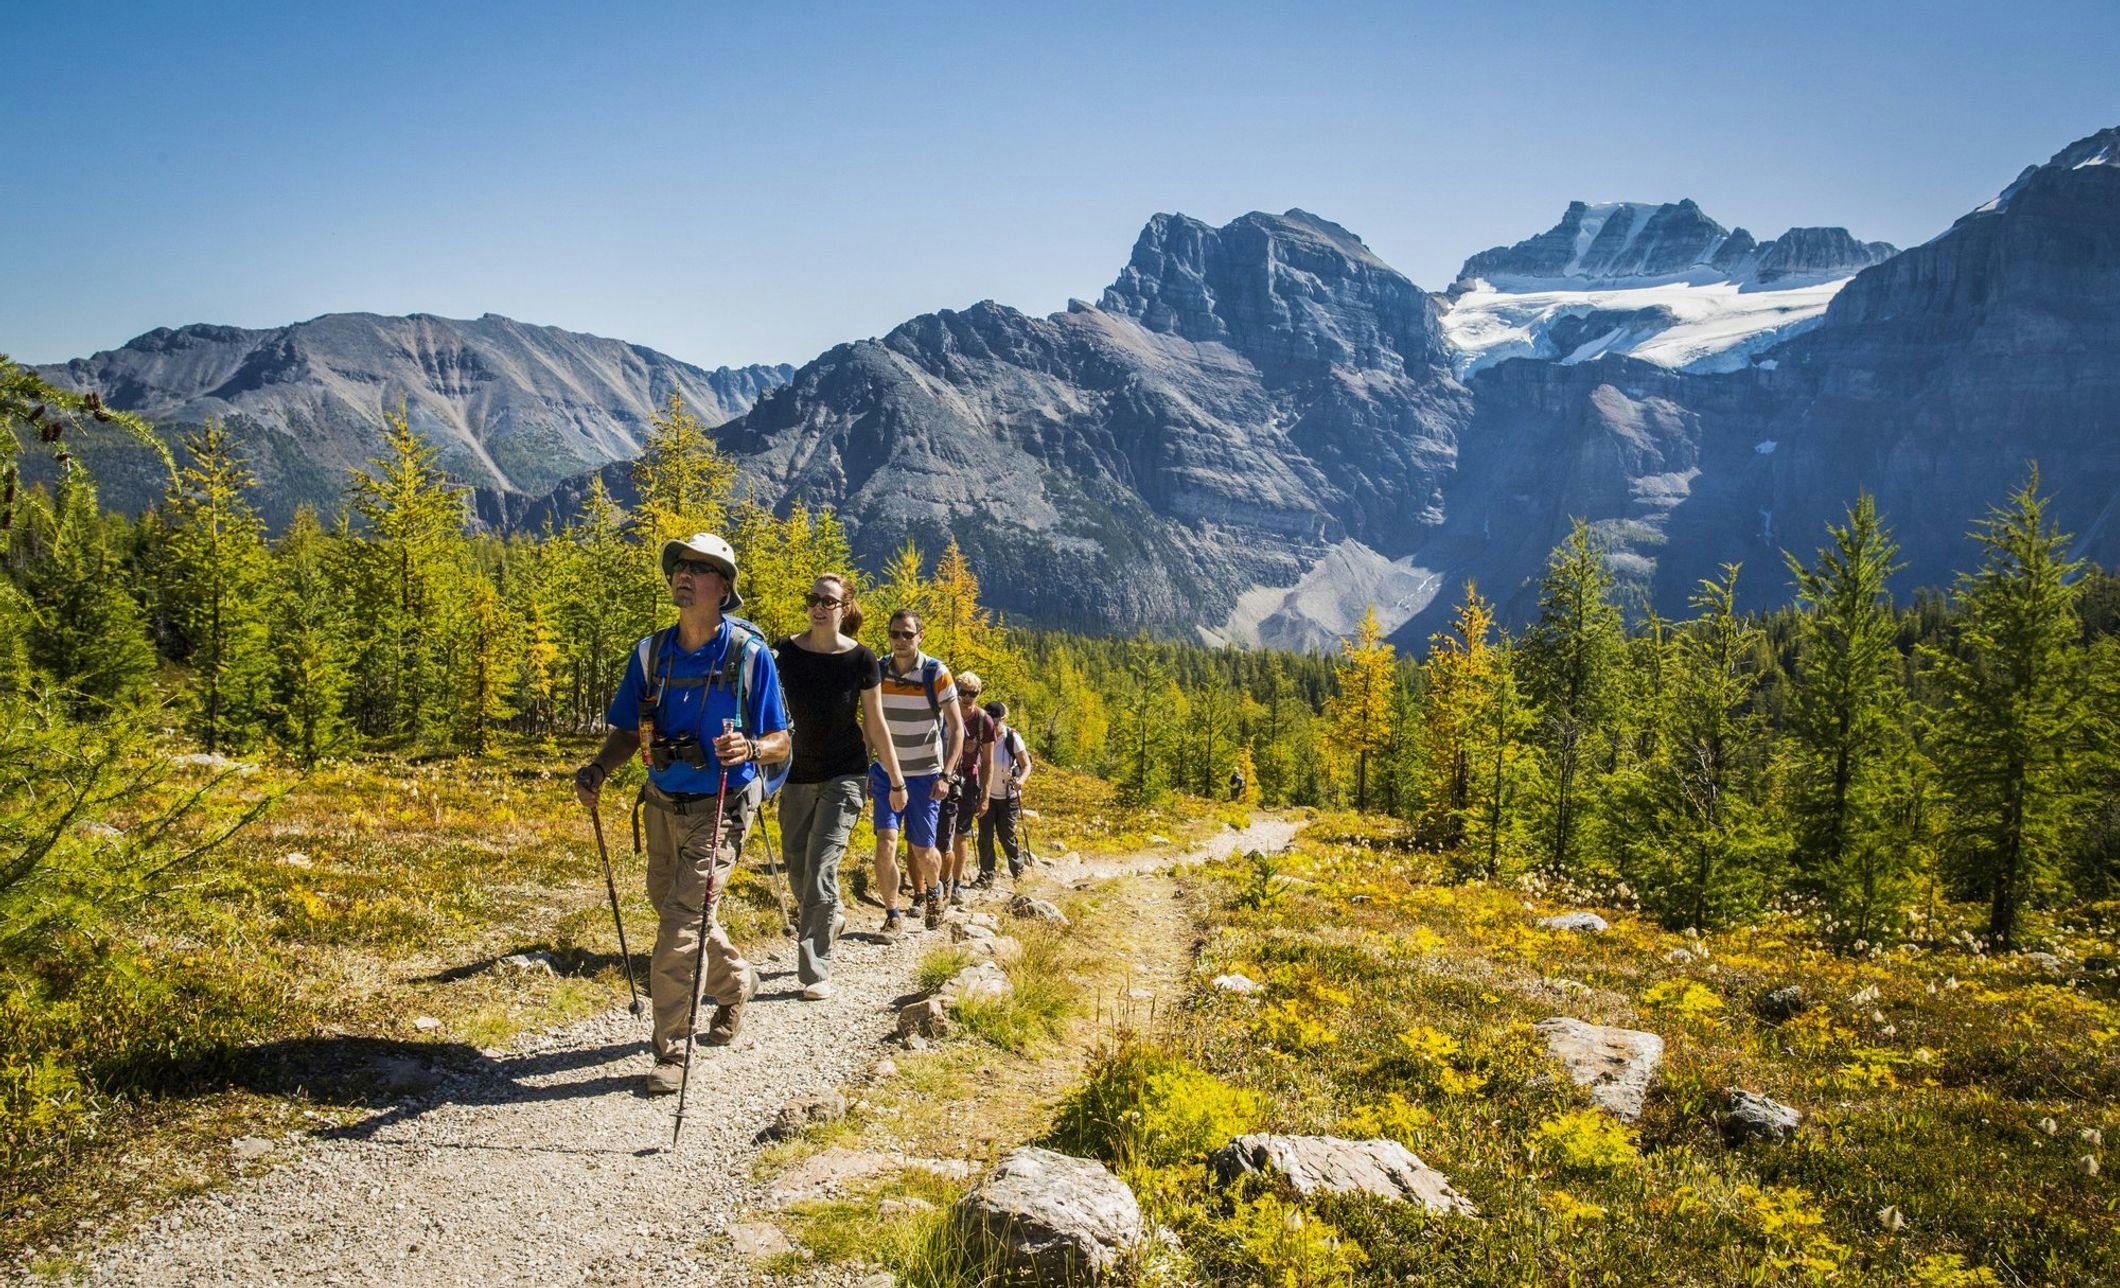 Hiking Tour - Discover Banff Tours - Guided